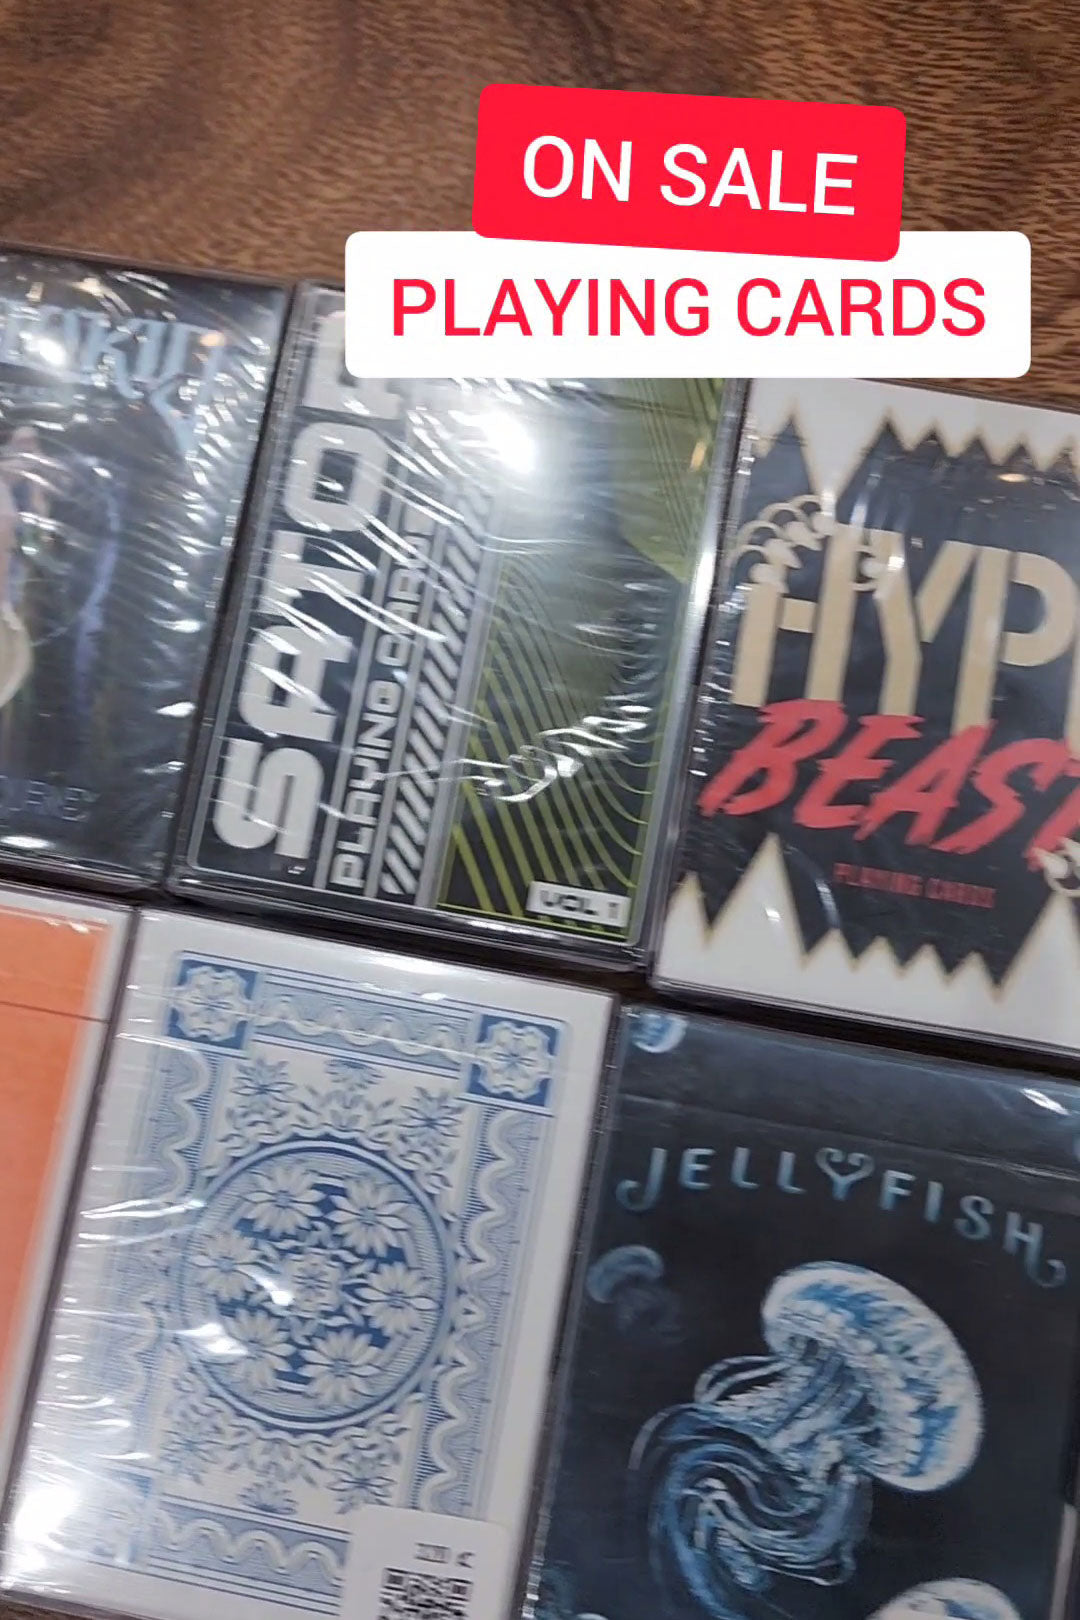 On sale playing cards!